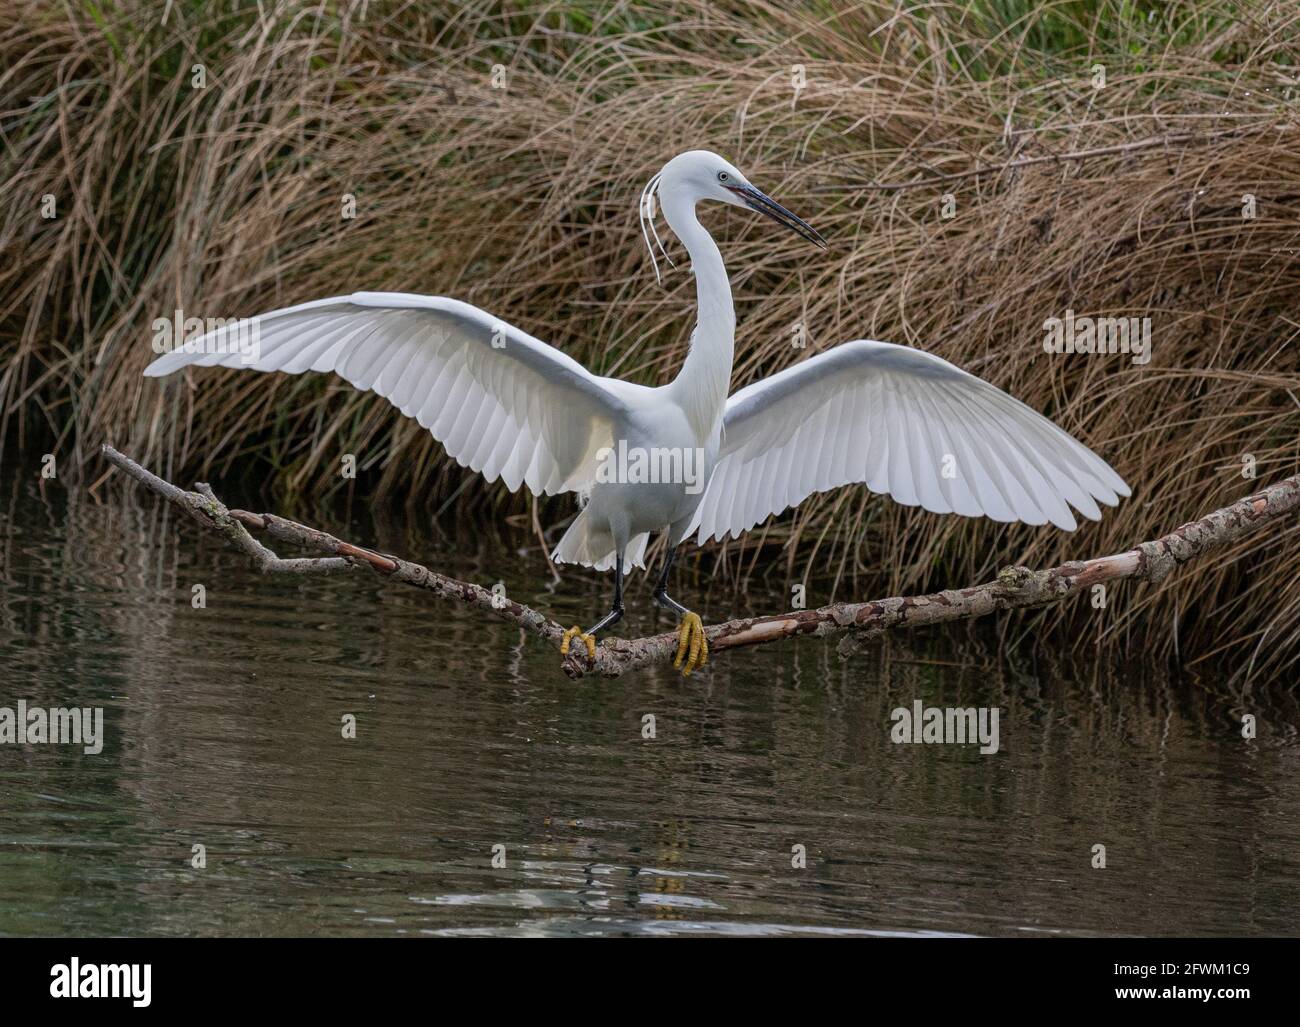 An elegant Little Egret ( Egretta garzetta) balancing on a branch with outstretched wings  over freshwater. UK Stock Photo